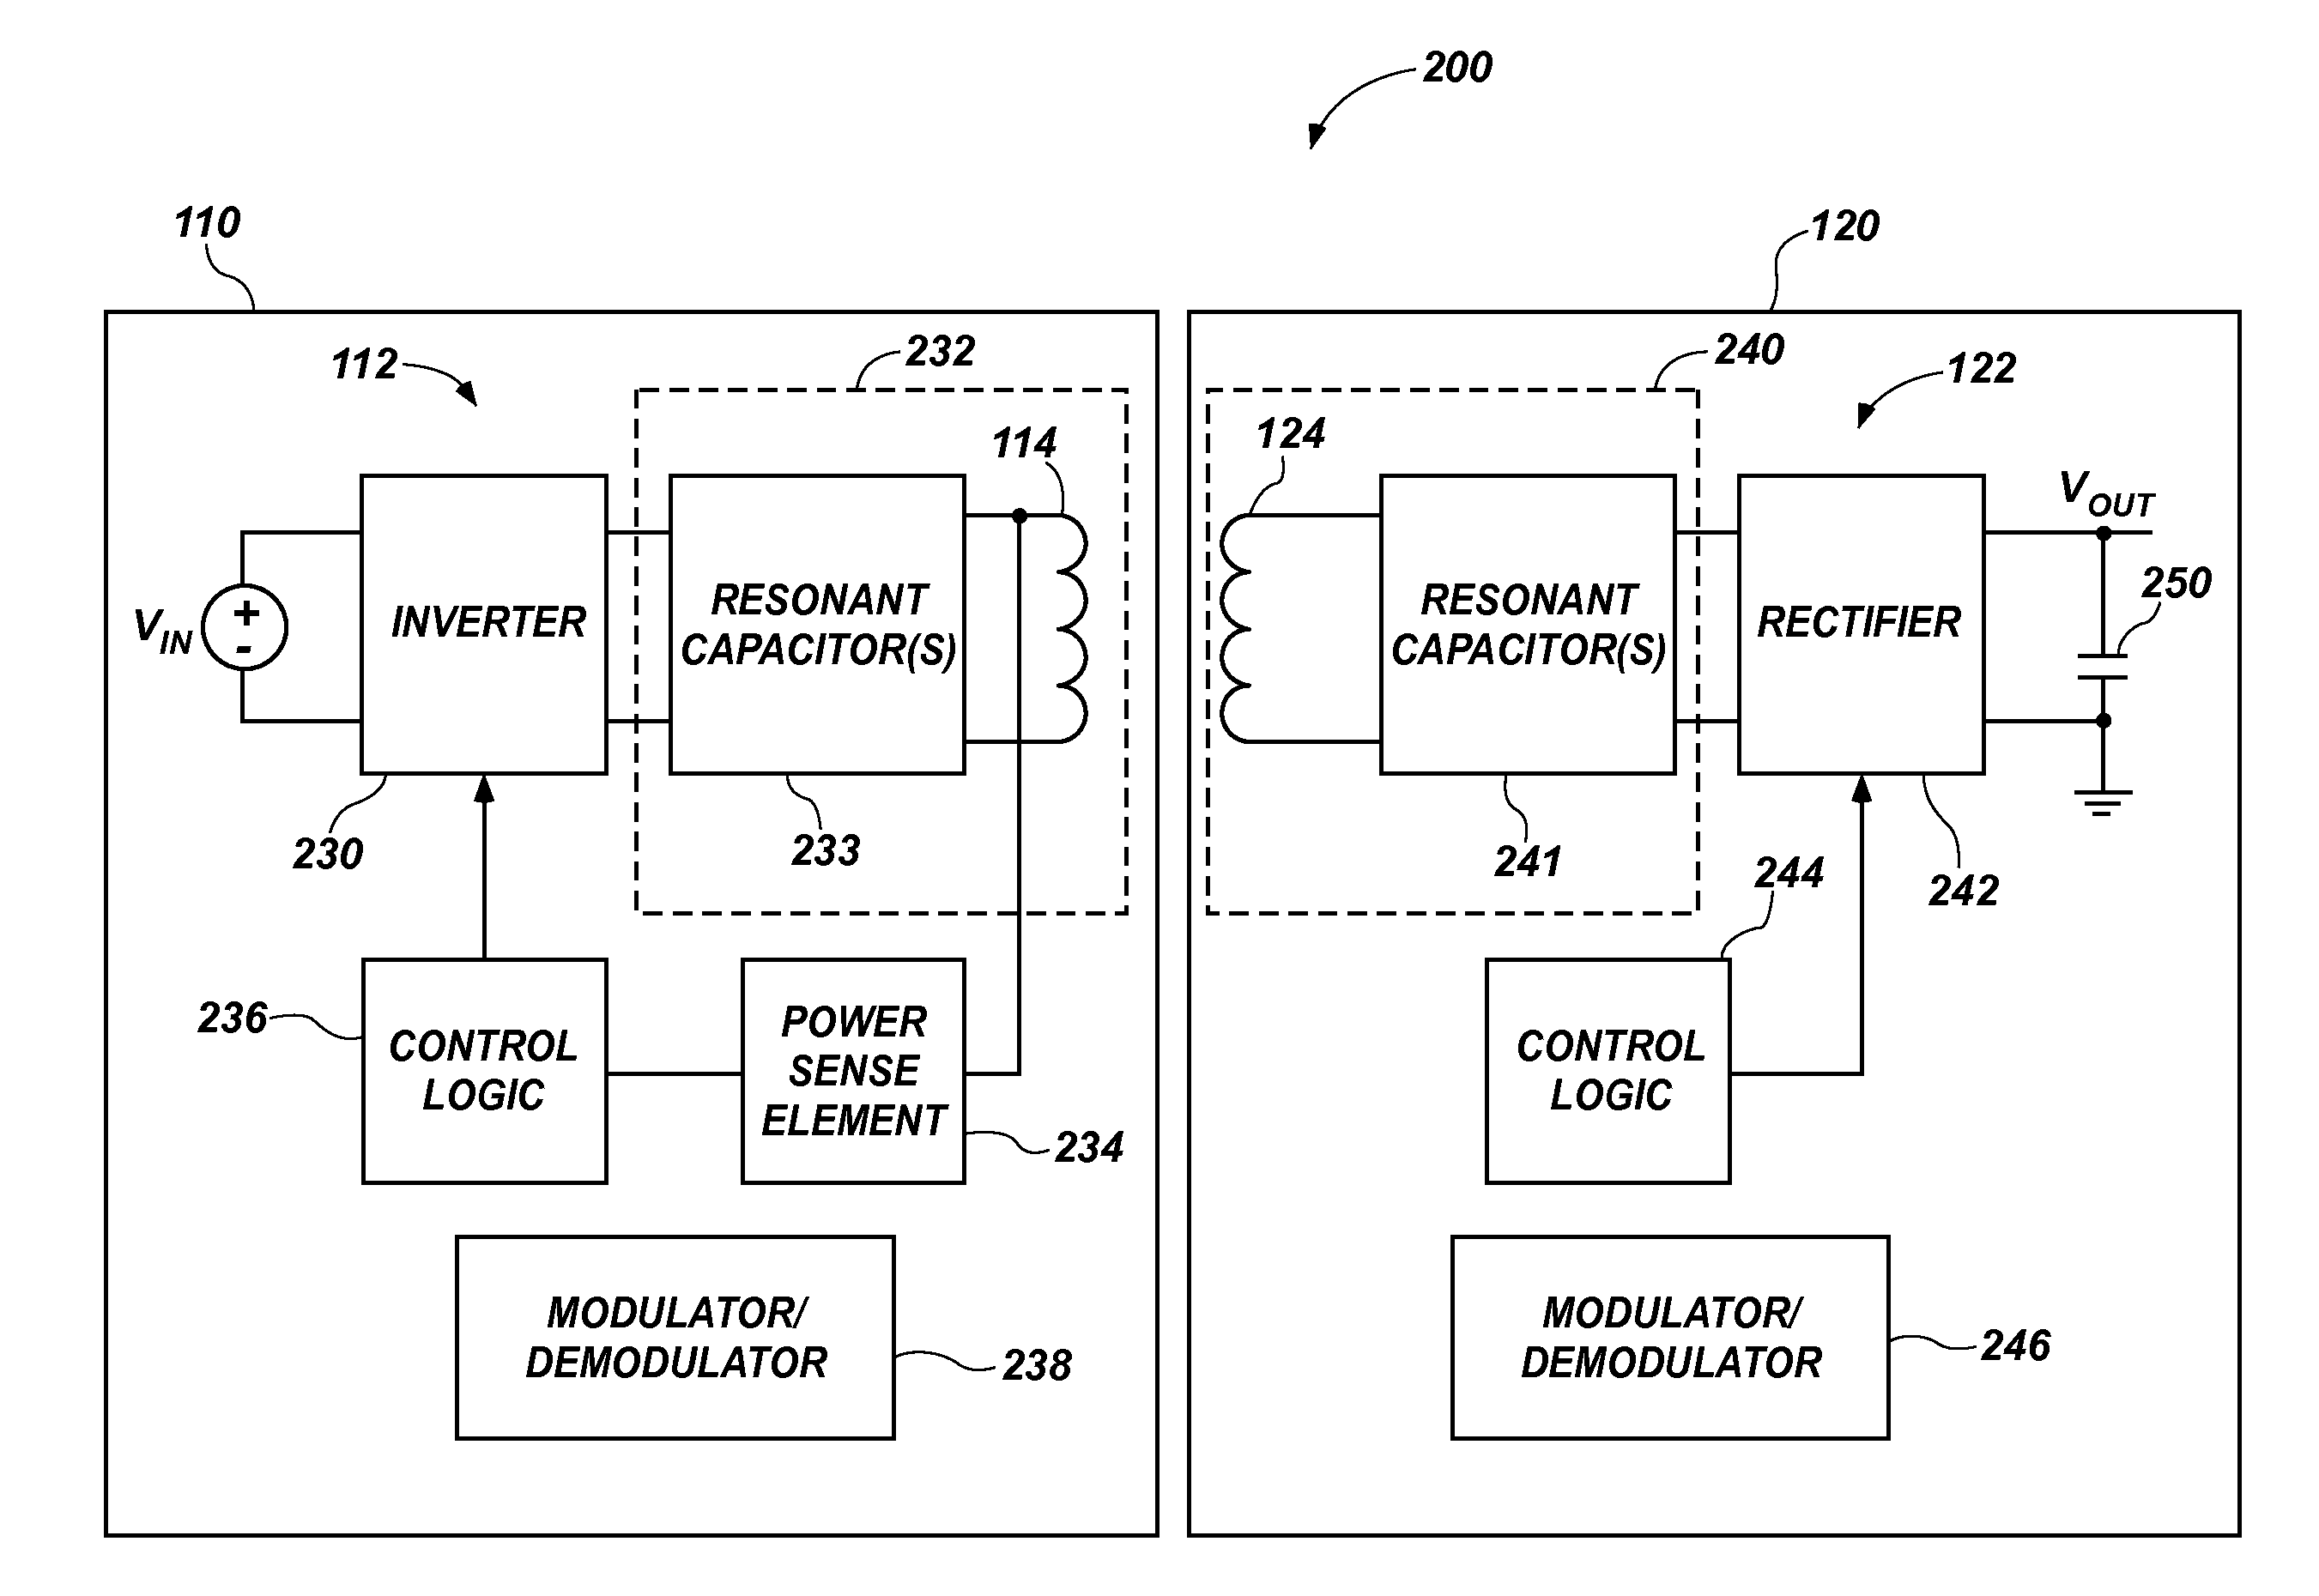 Apparatus, system, and method for detecting a foreign object in an inductive wireless power transfer system based on input power